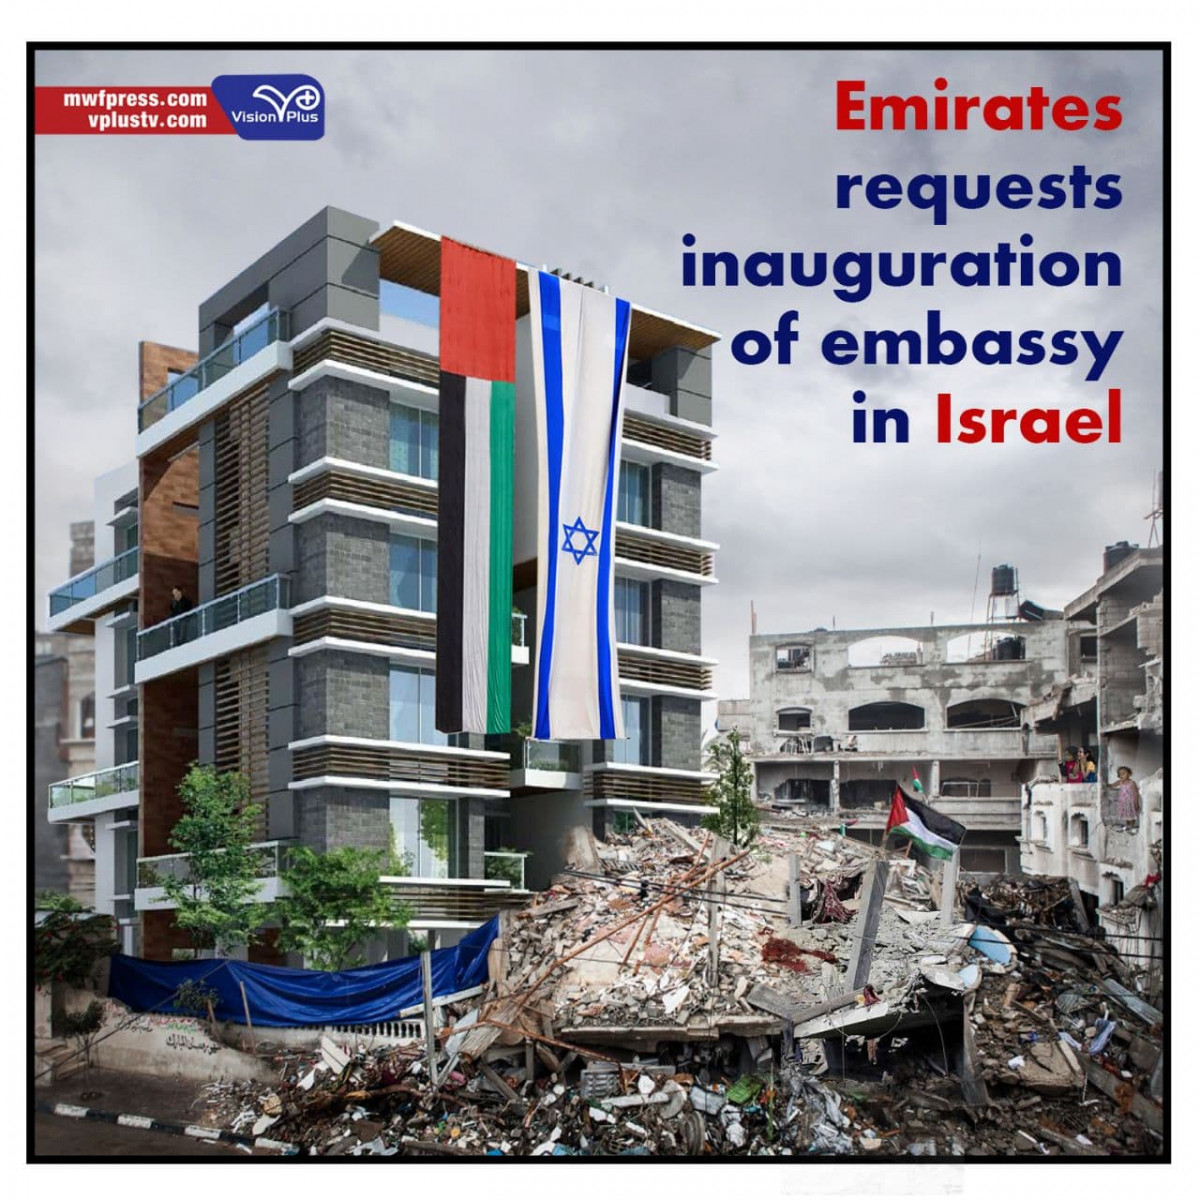 Emirates requests inauguration of embassy in Israel